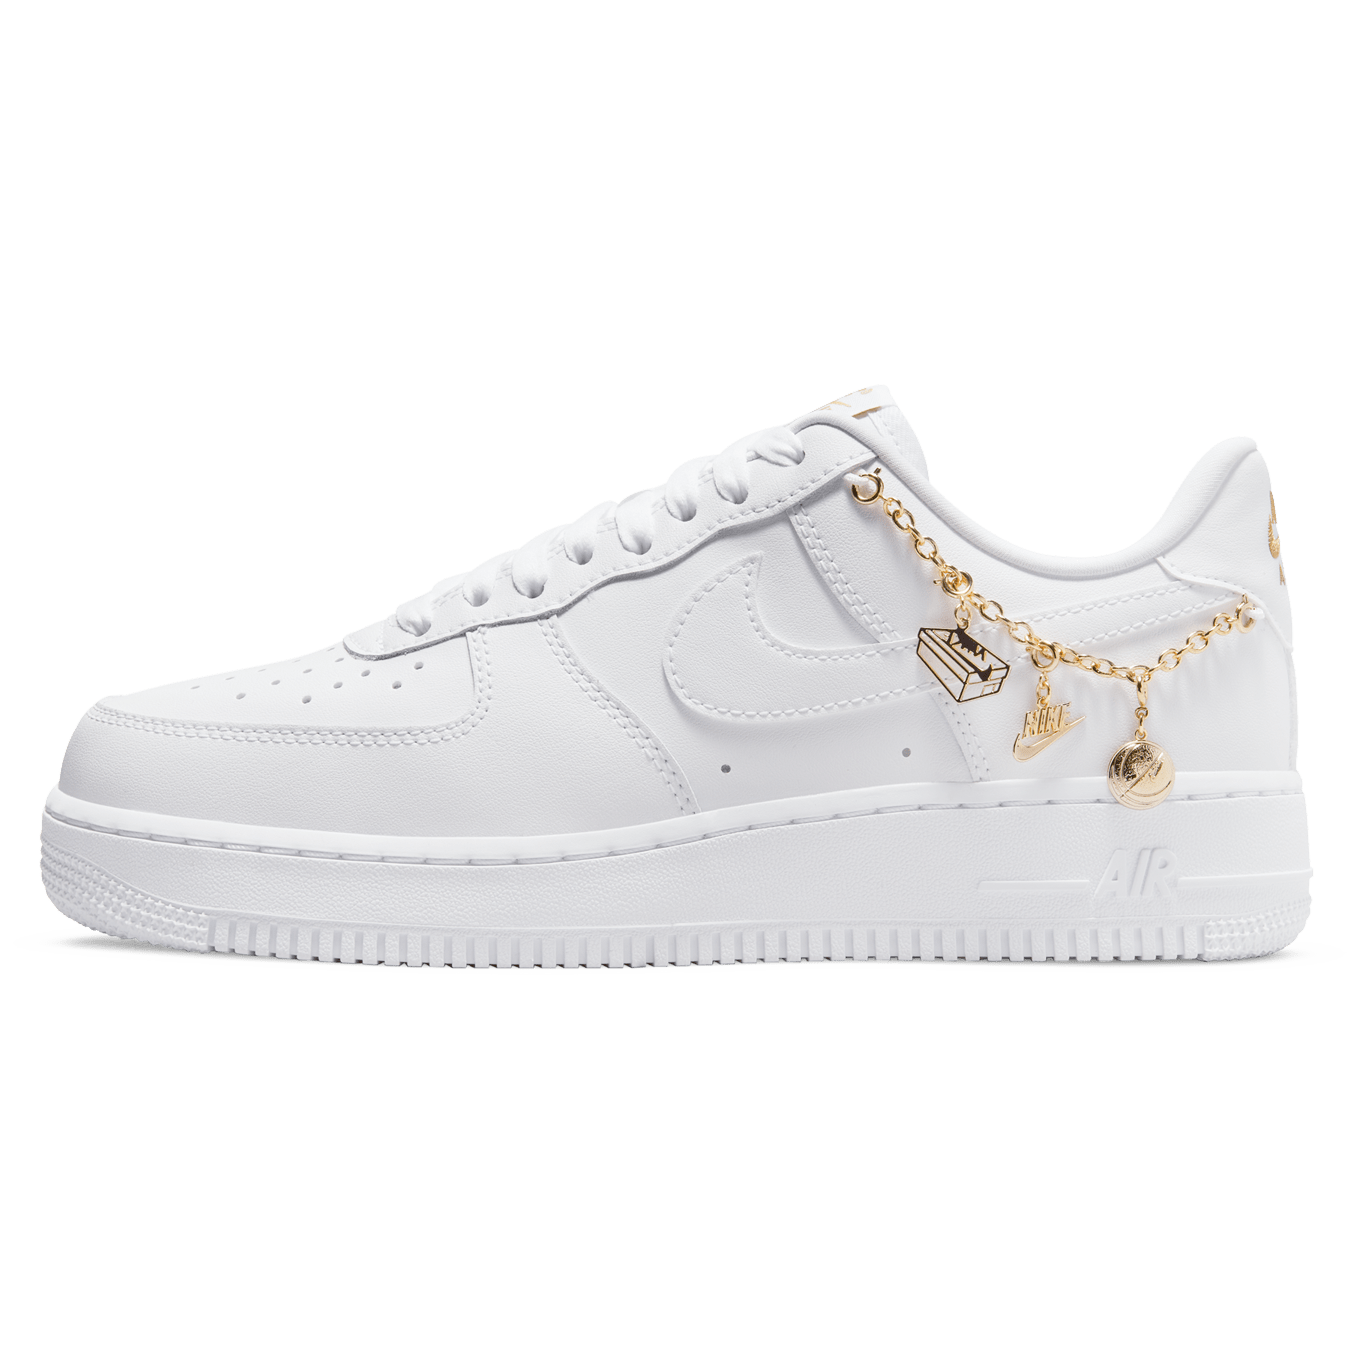 Nike Wmns Air Force 1 07 LX Lucky Charms DD1525 100